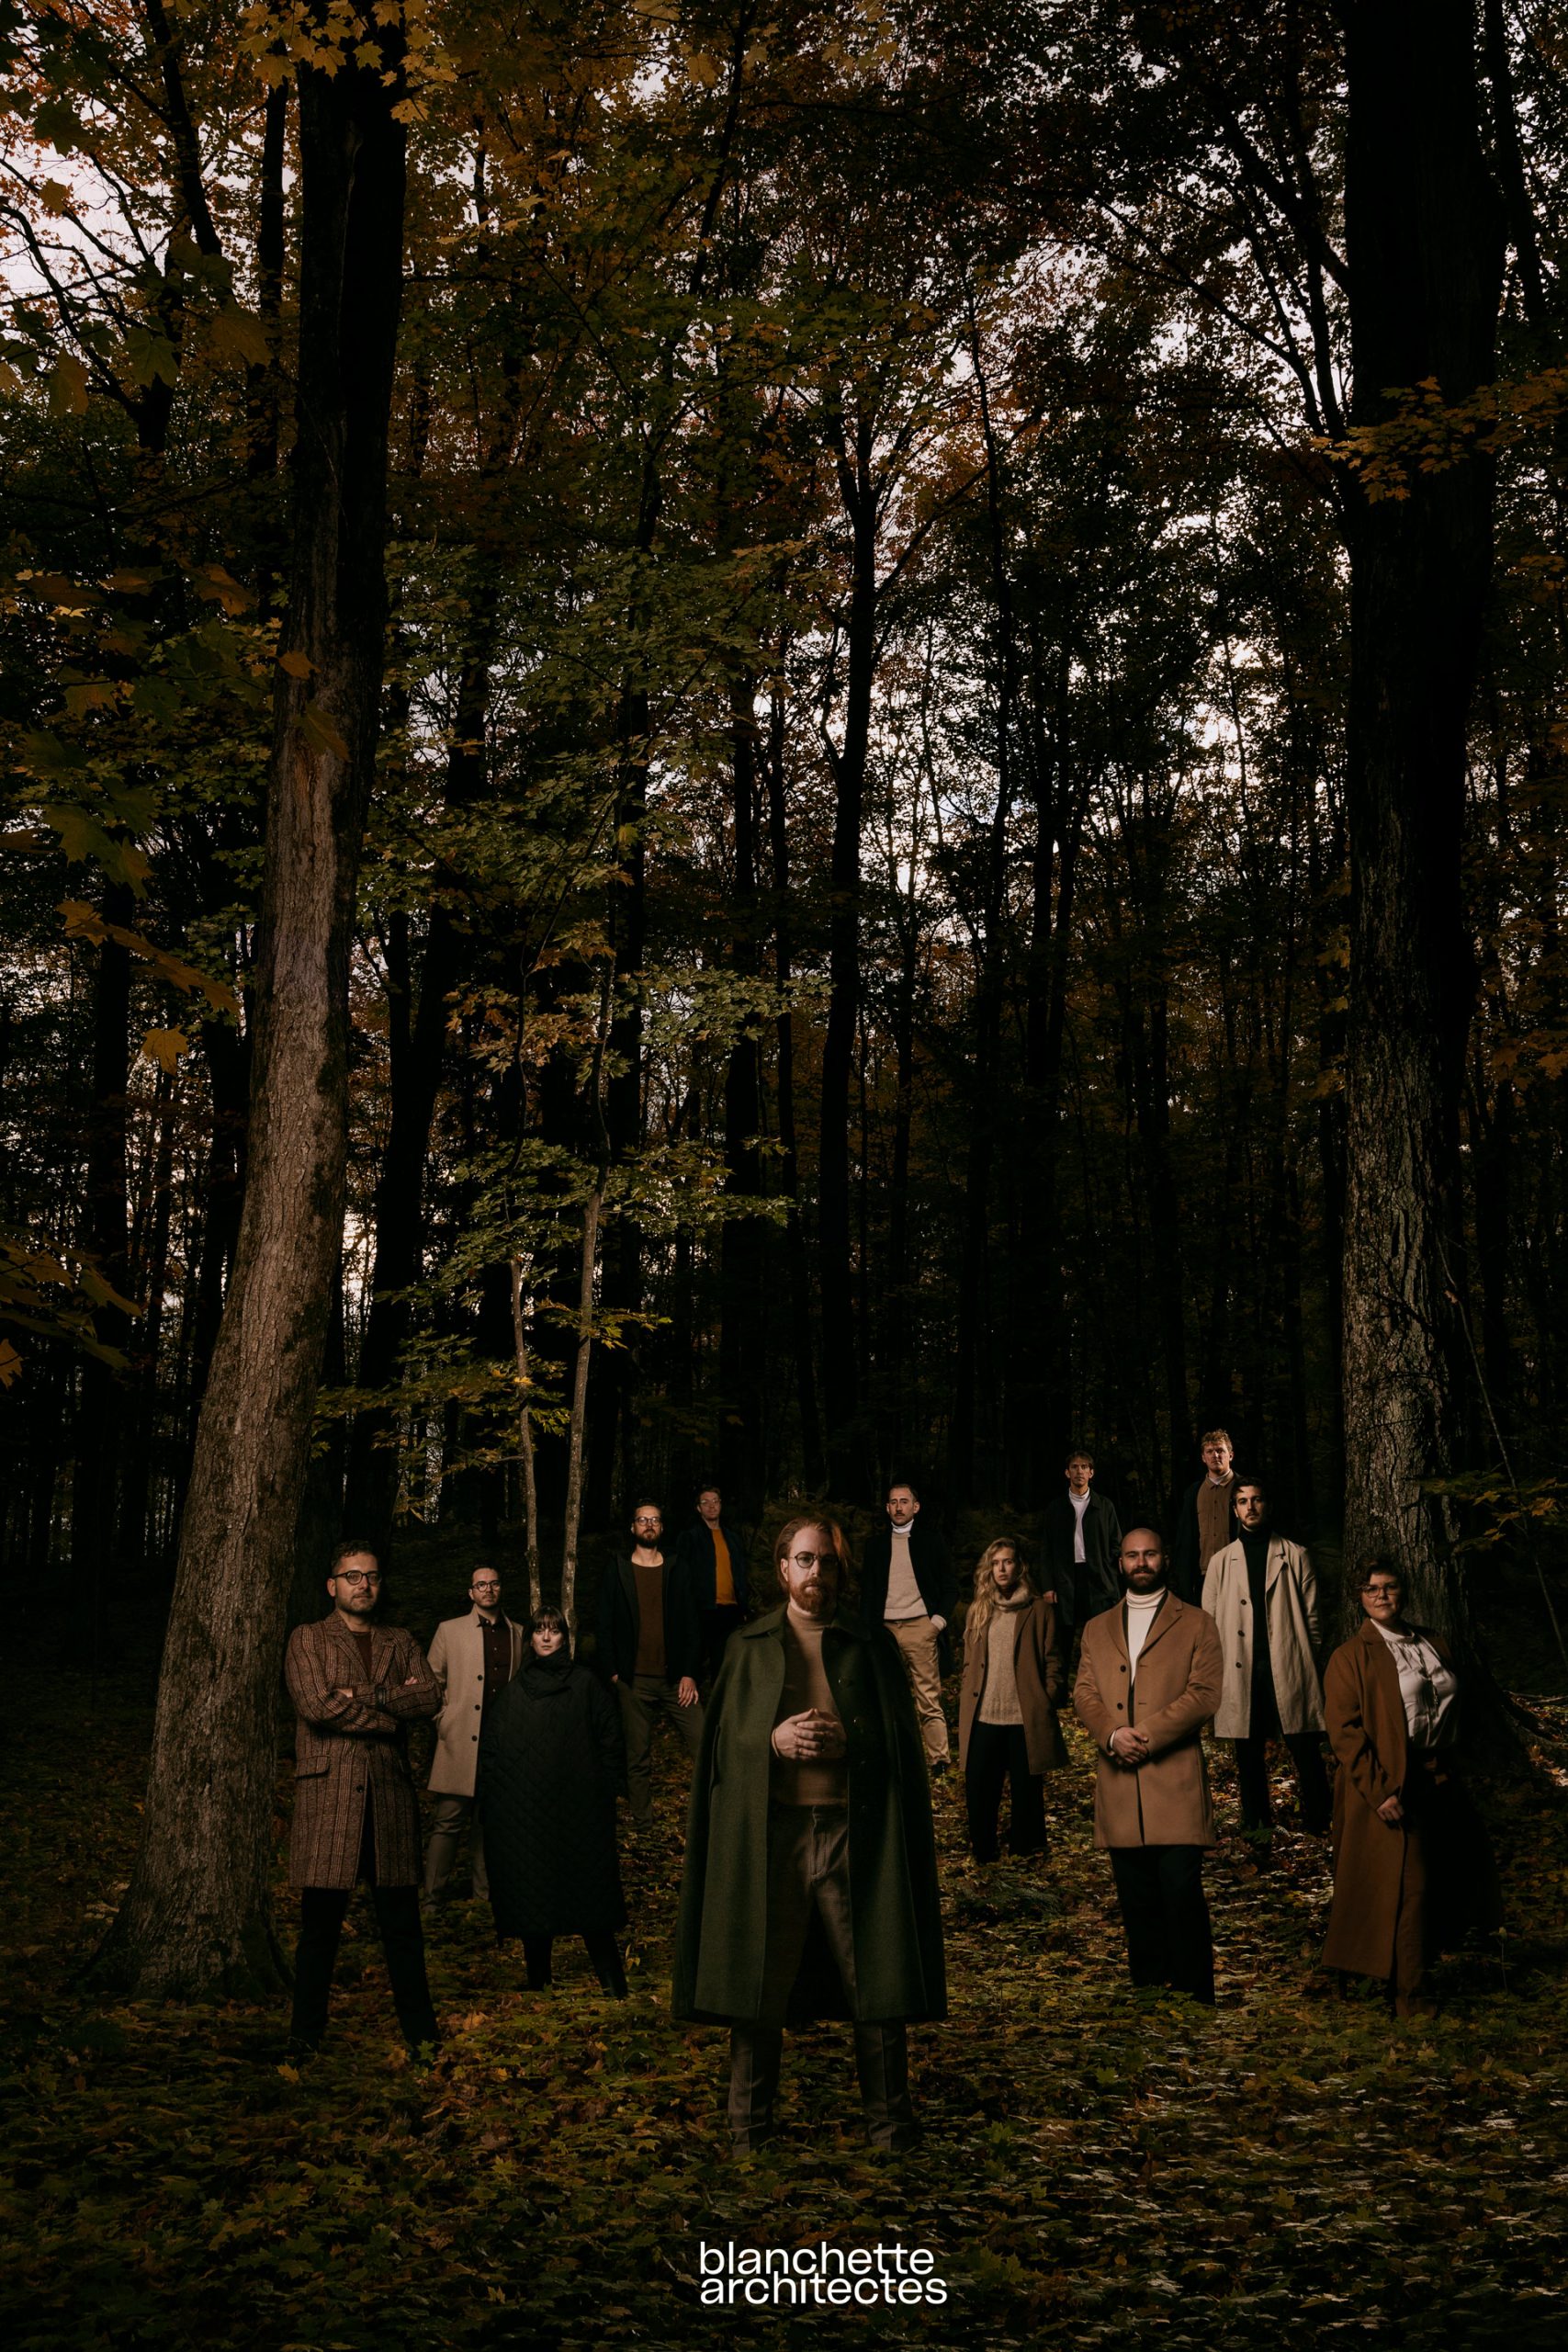 Corporate team photography for Architect Studio Blanchette Architectes. Fashion photography in forest autumn